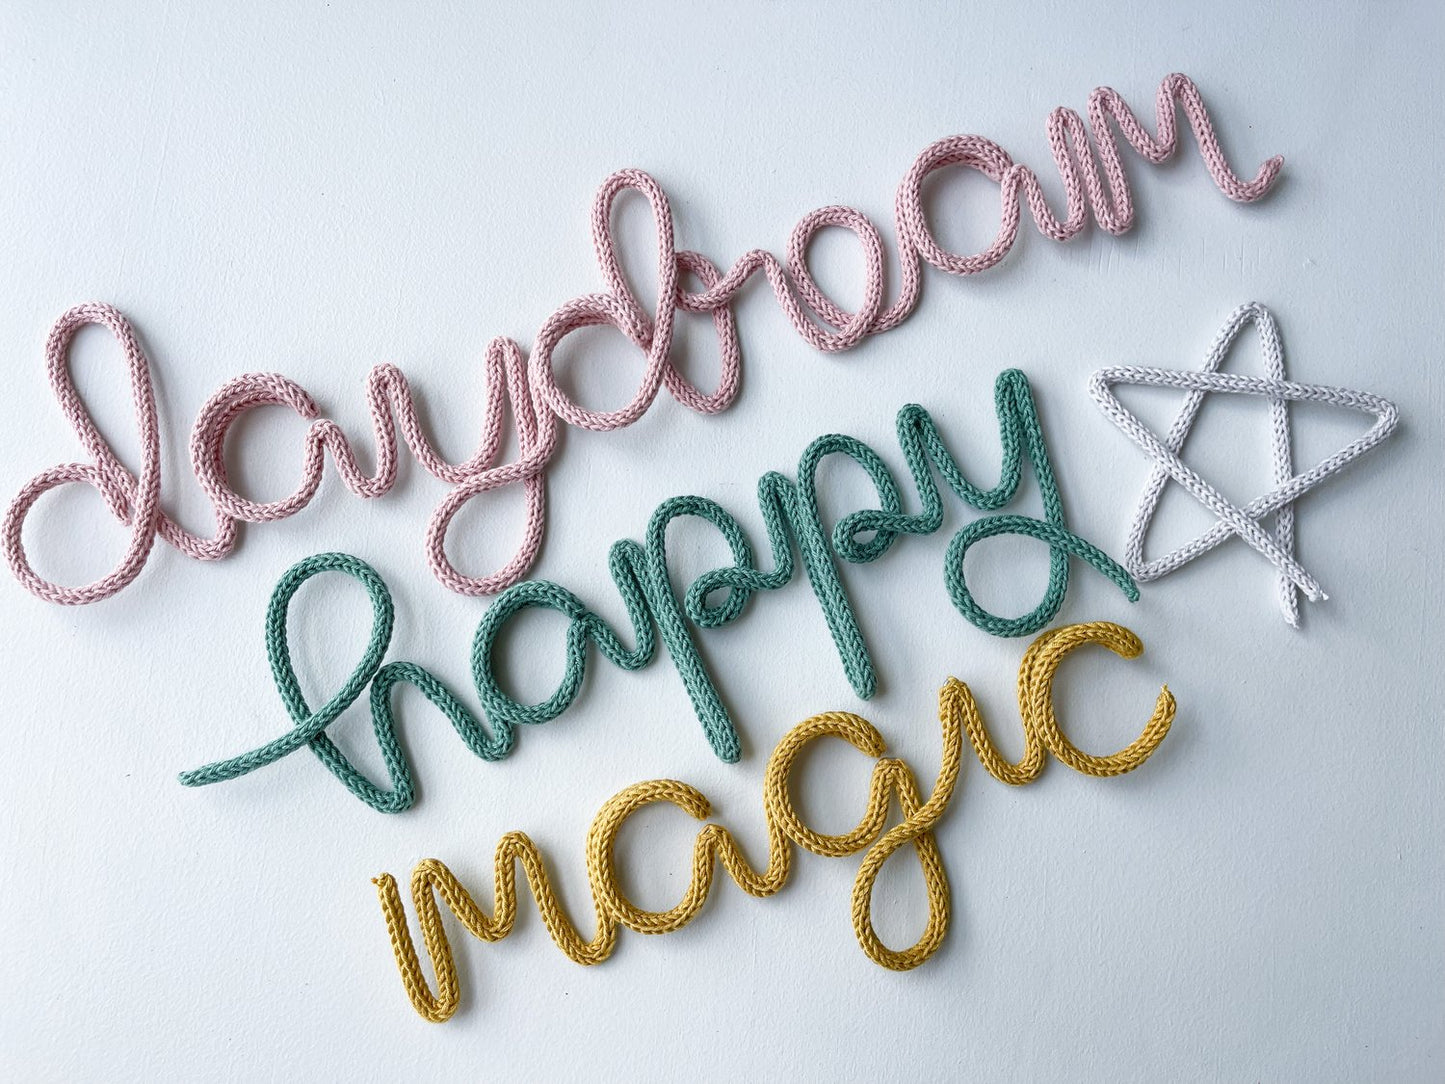 Flat lay style photo feature knitted wire words and wire art: daydream in the color blush, happy in the color sage green, magic in mustard and a whimsical star in light gray.